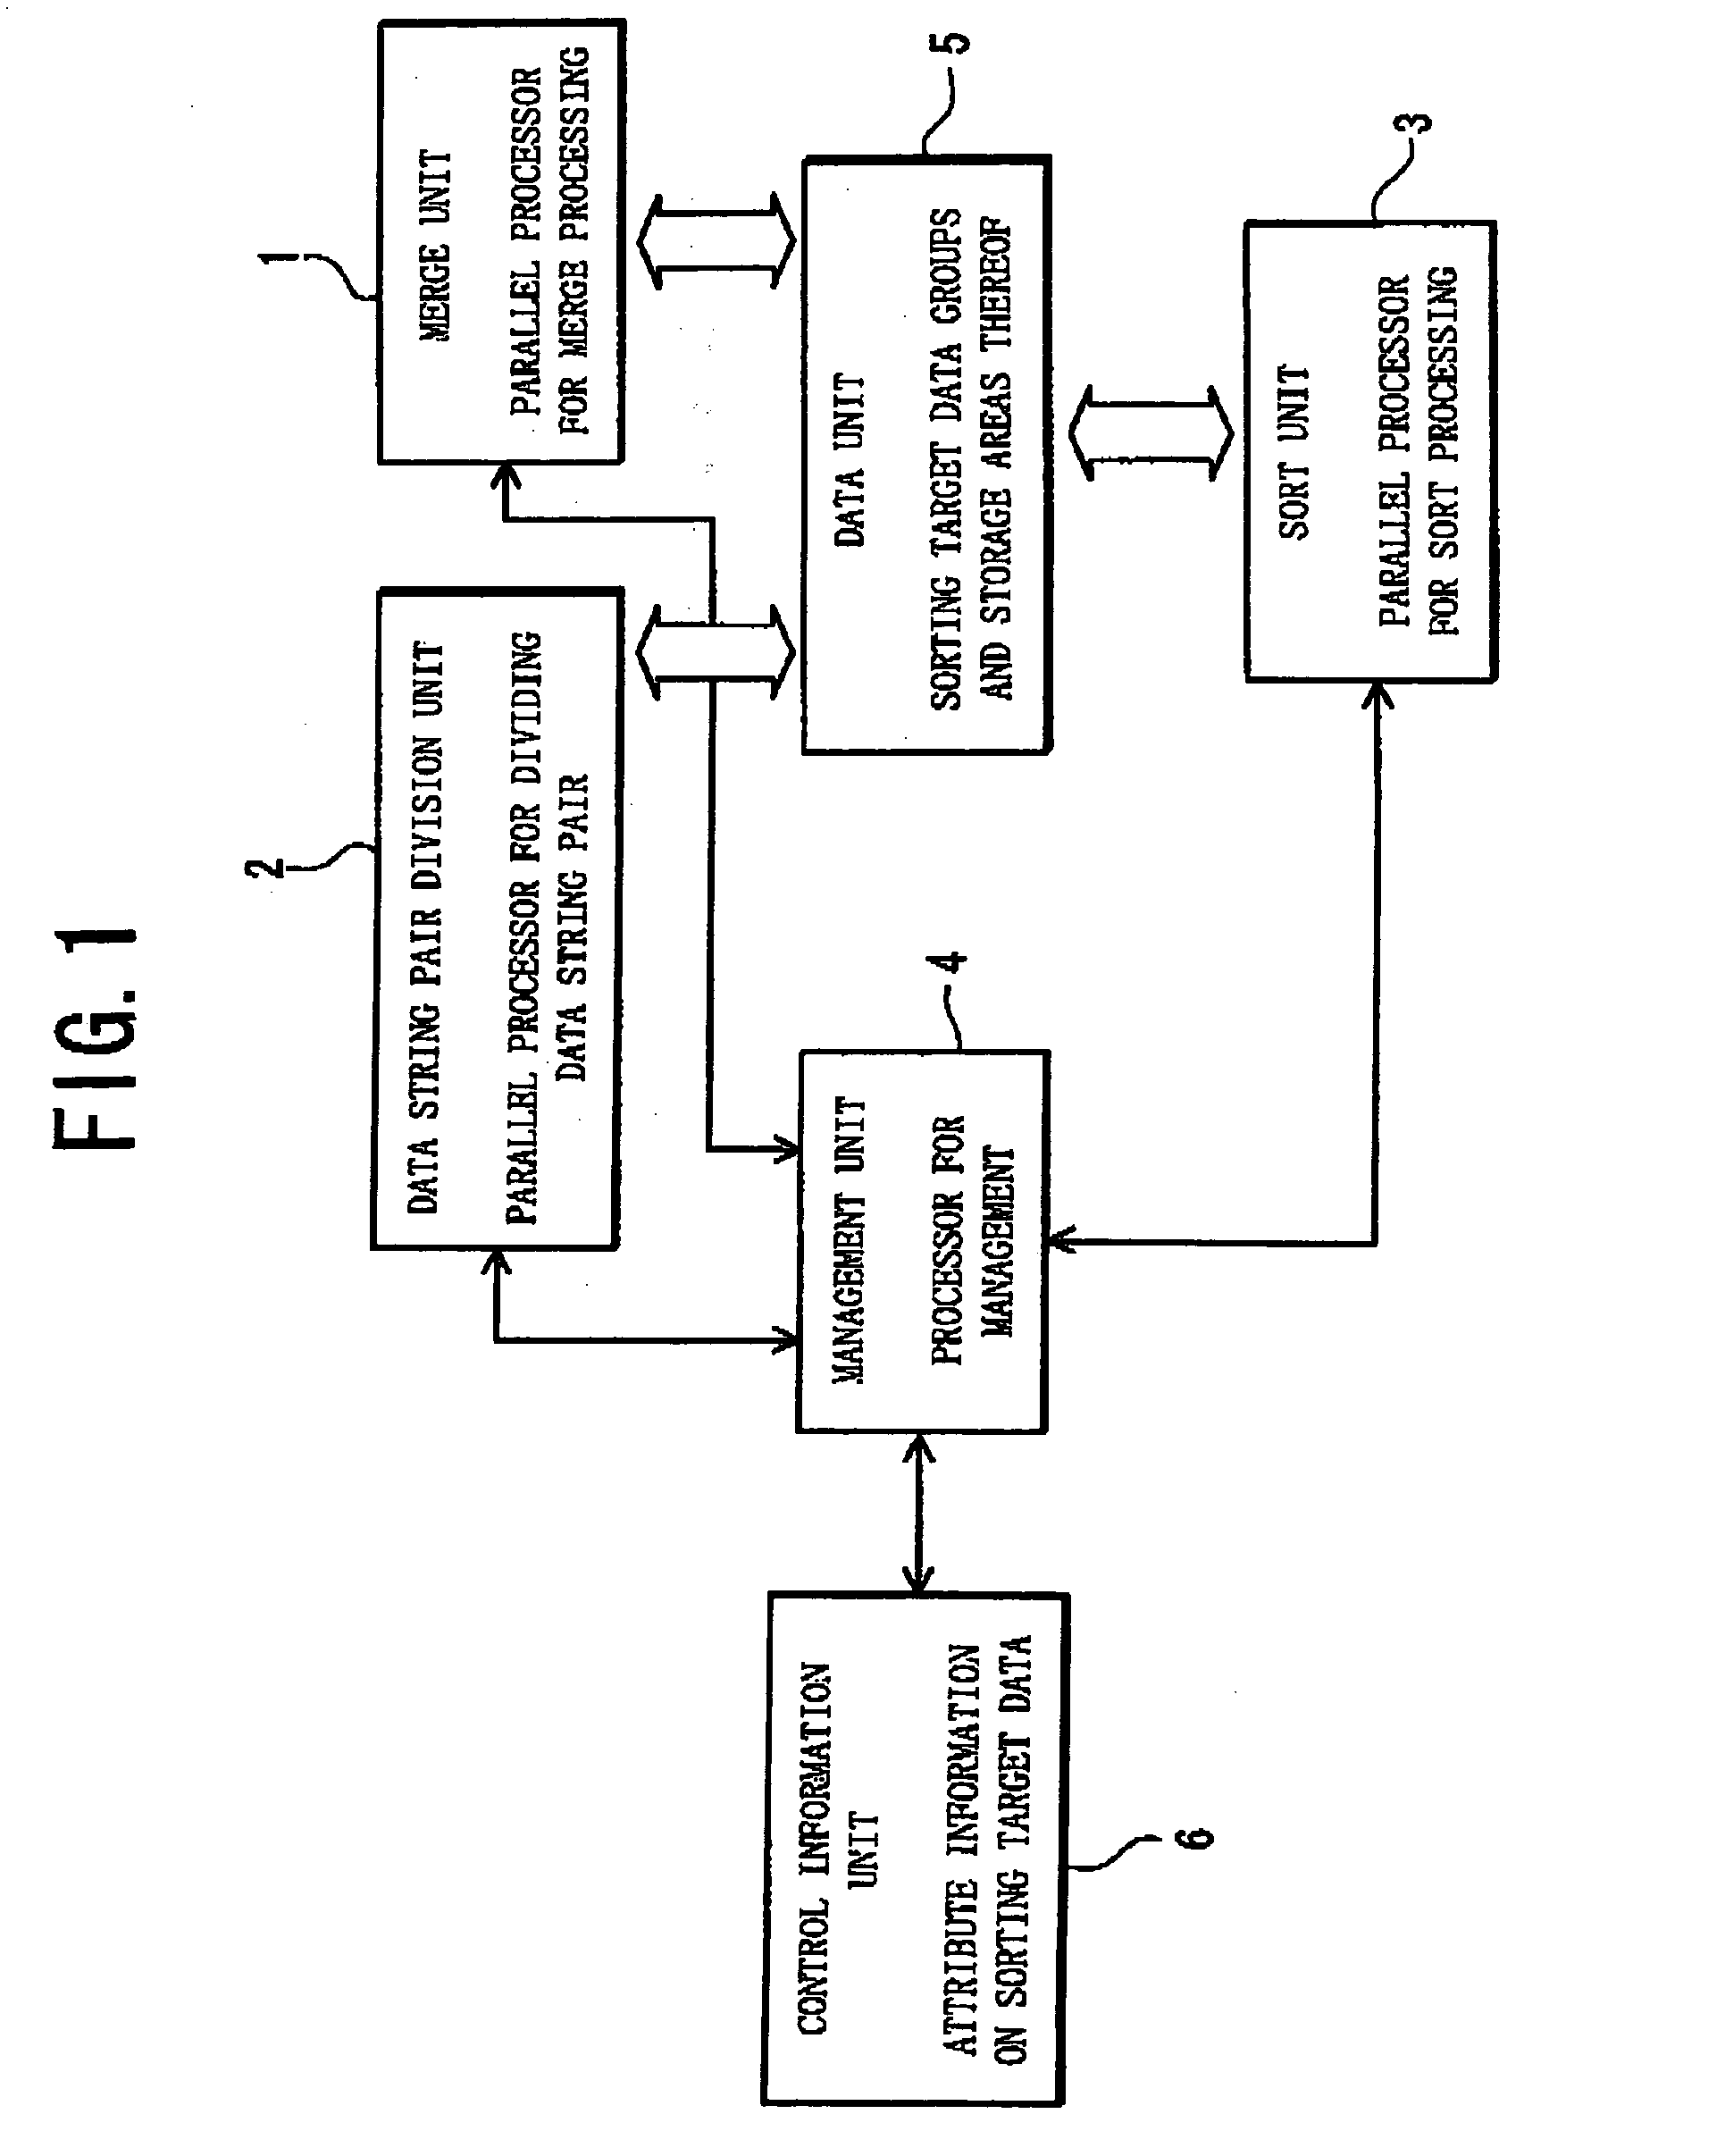 Parallel merge/sort processing device, method, and program